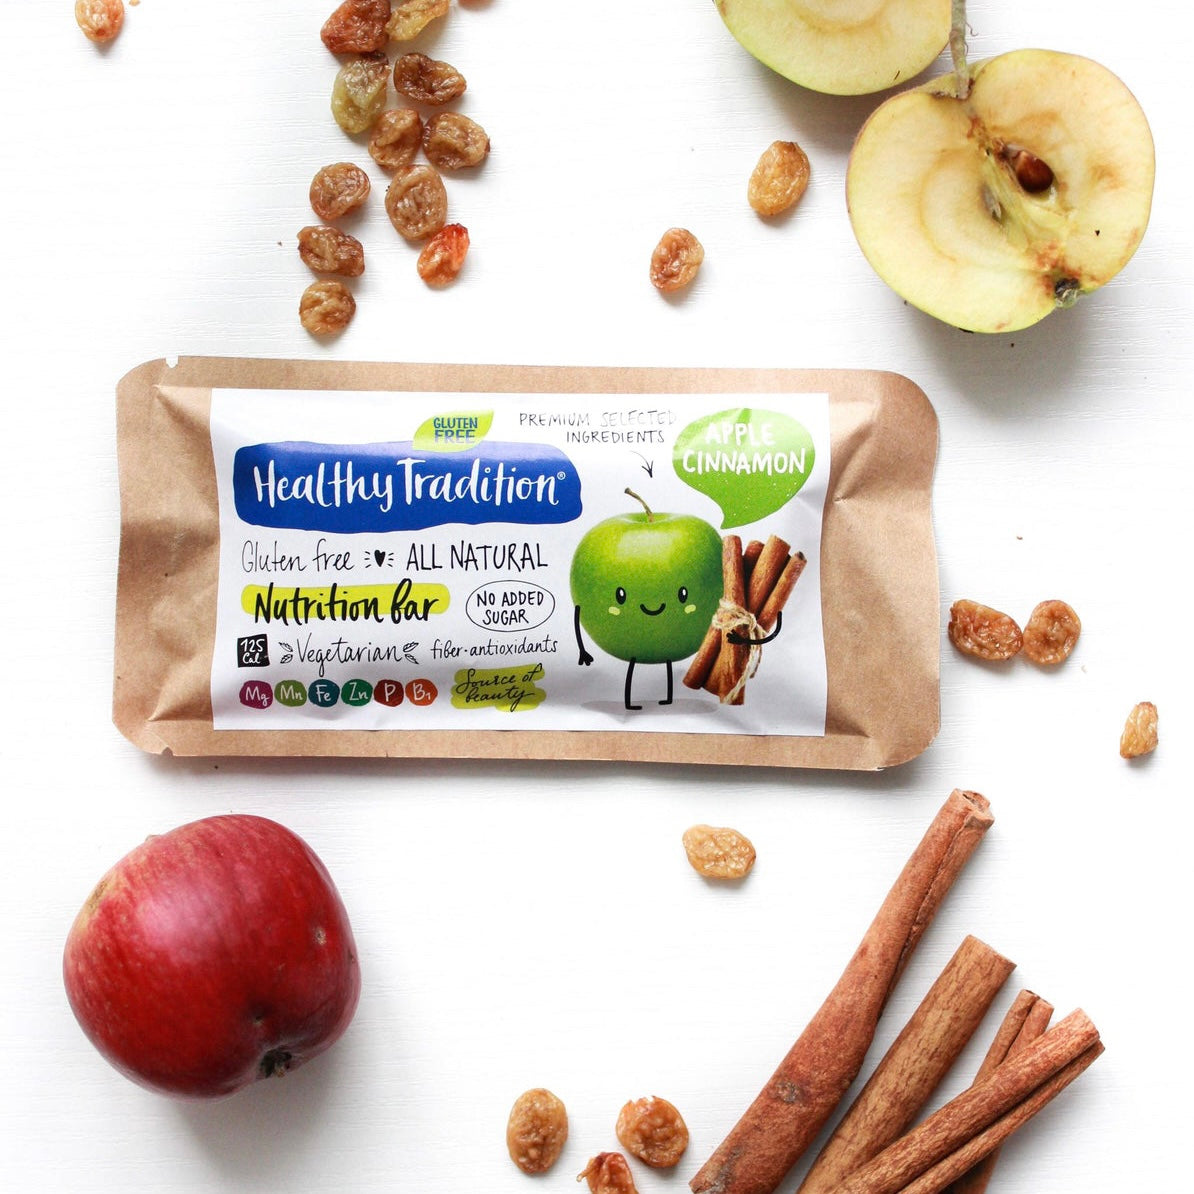 "Cinnamon Apple" TM Healthy Tradition bar without sugar and gluten, 34g